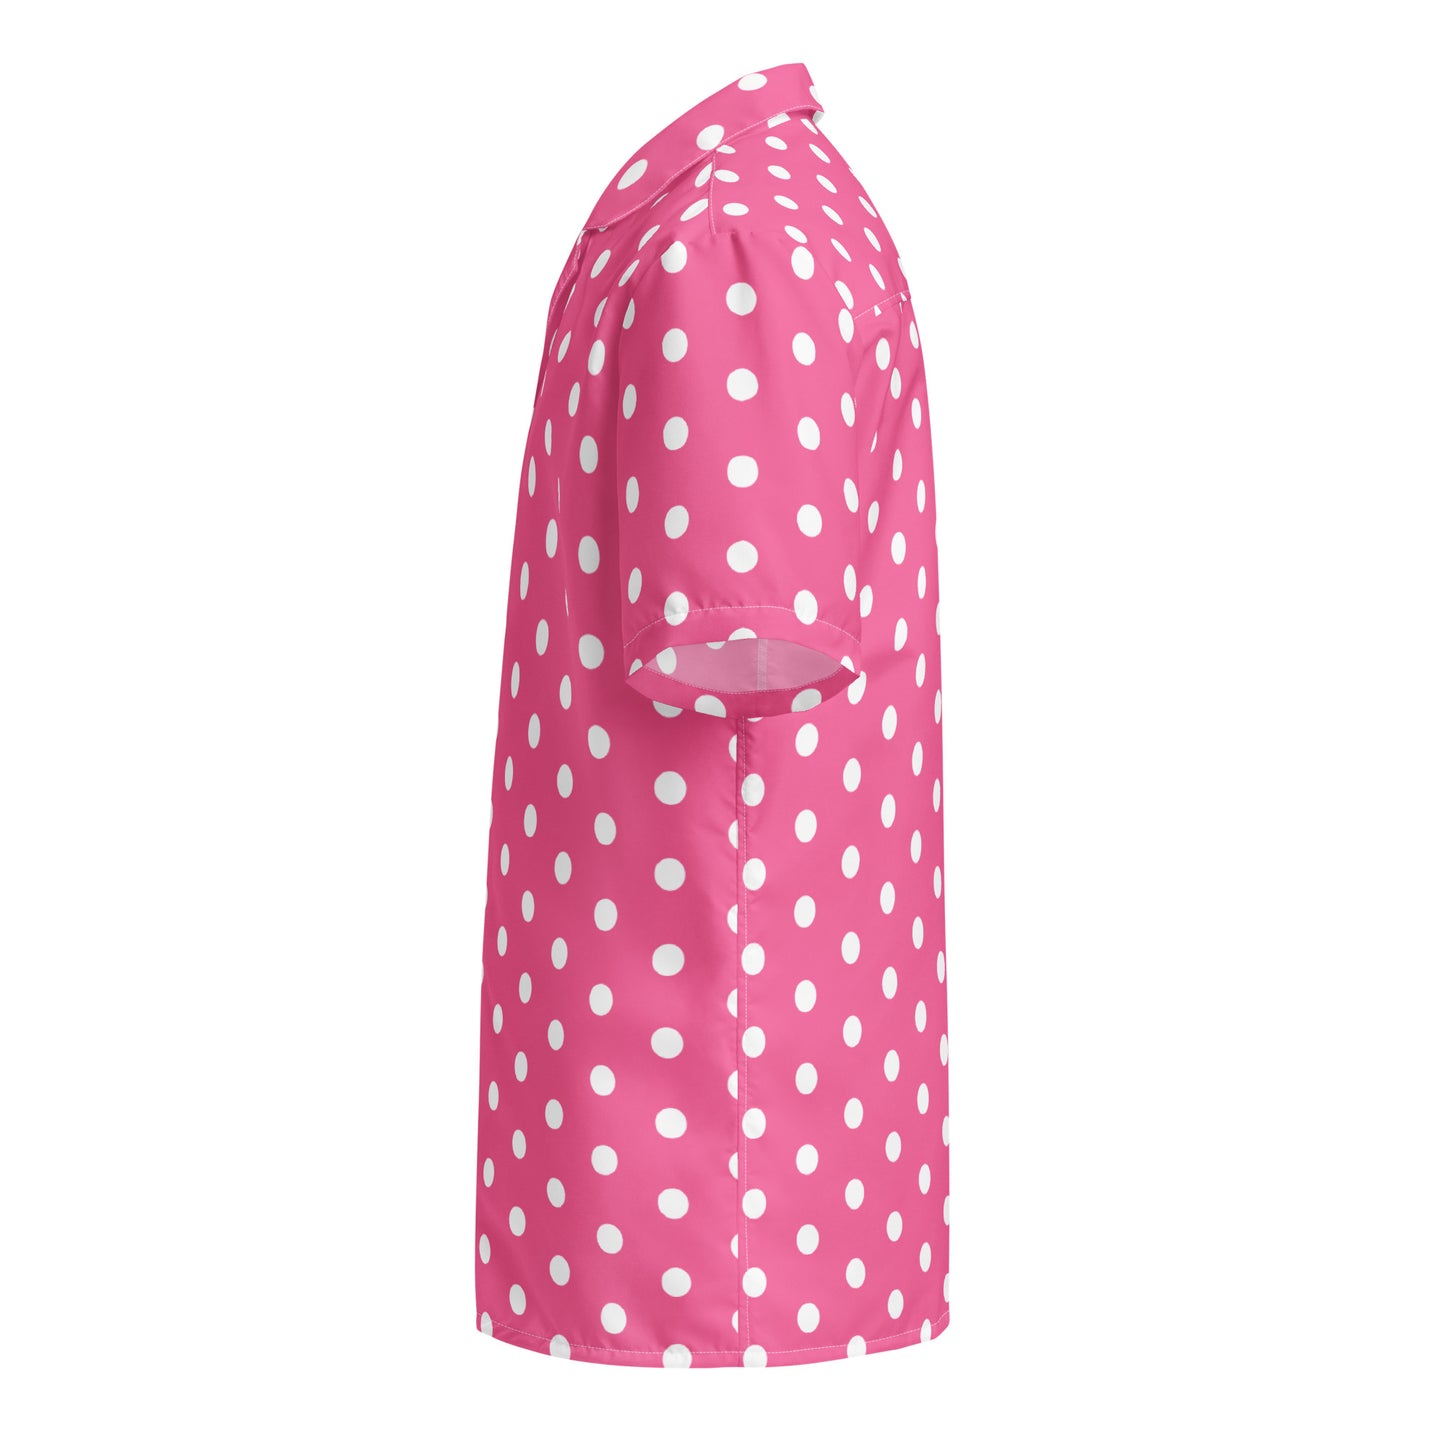 Pink Polkadot - Inspired By Harry Styles - Sustainably Made Unisex button shirt